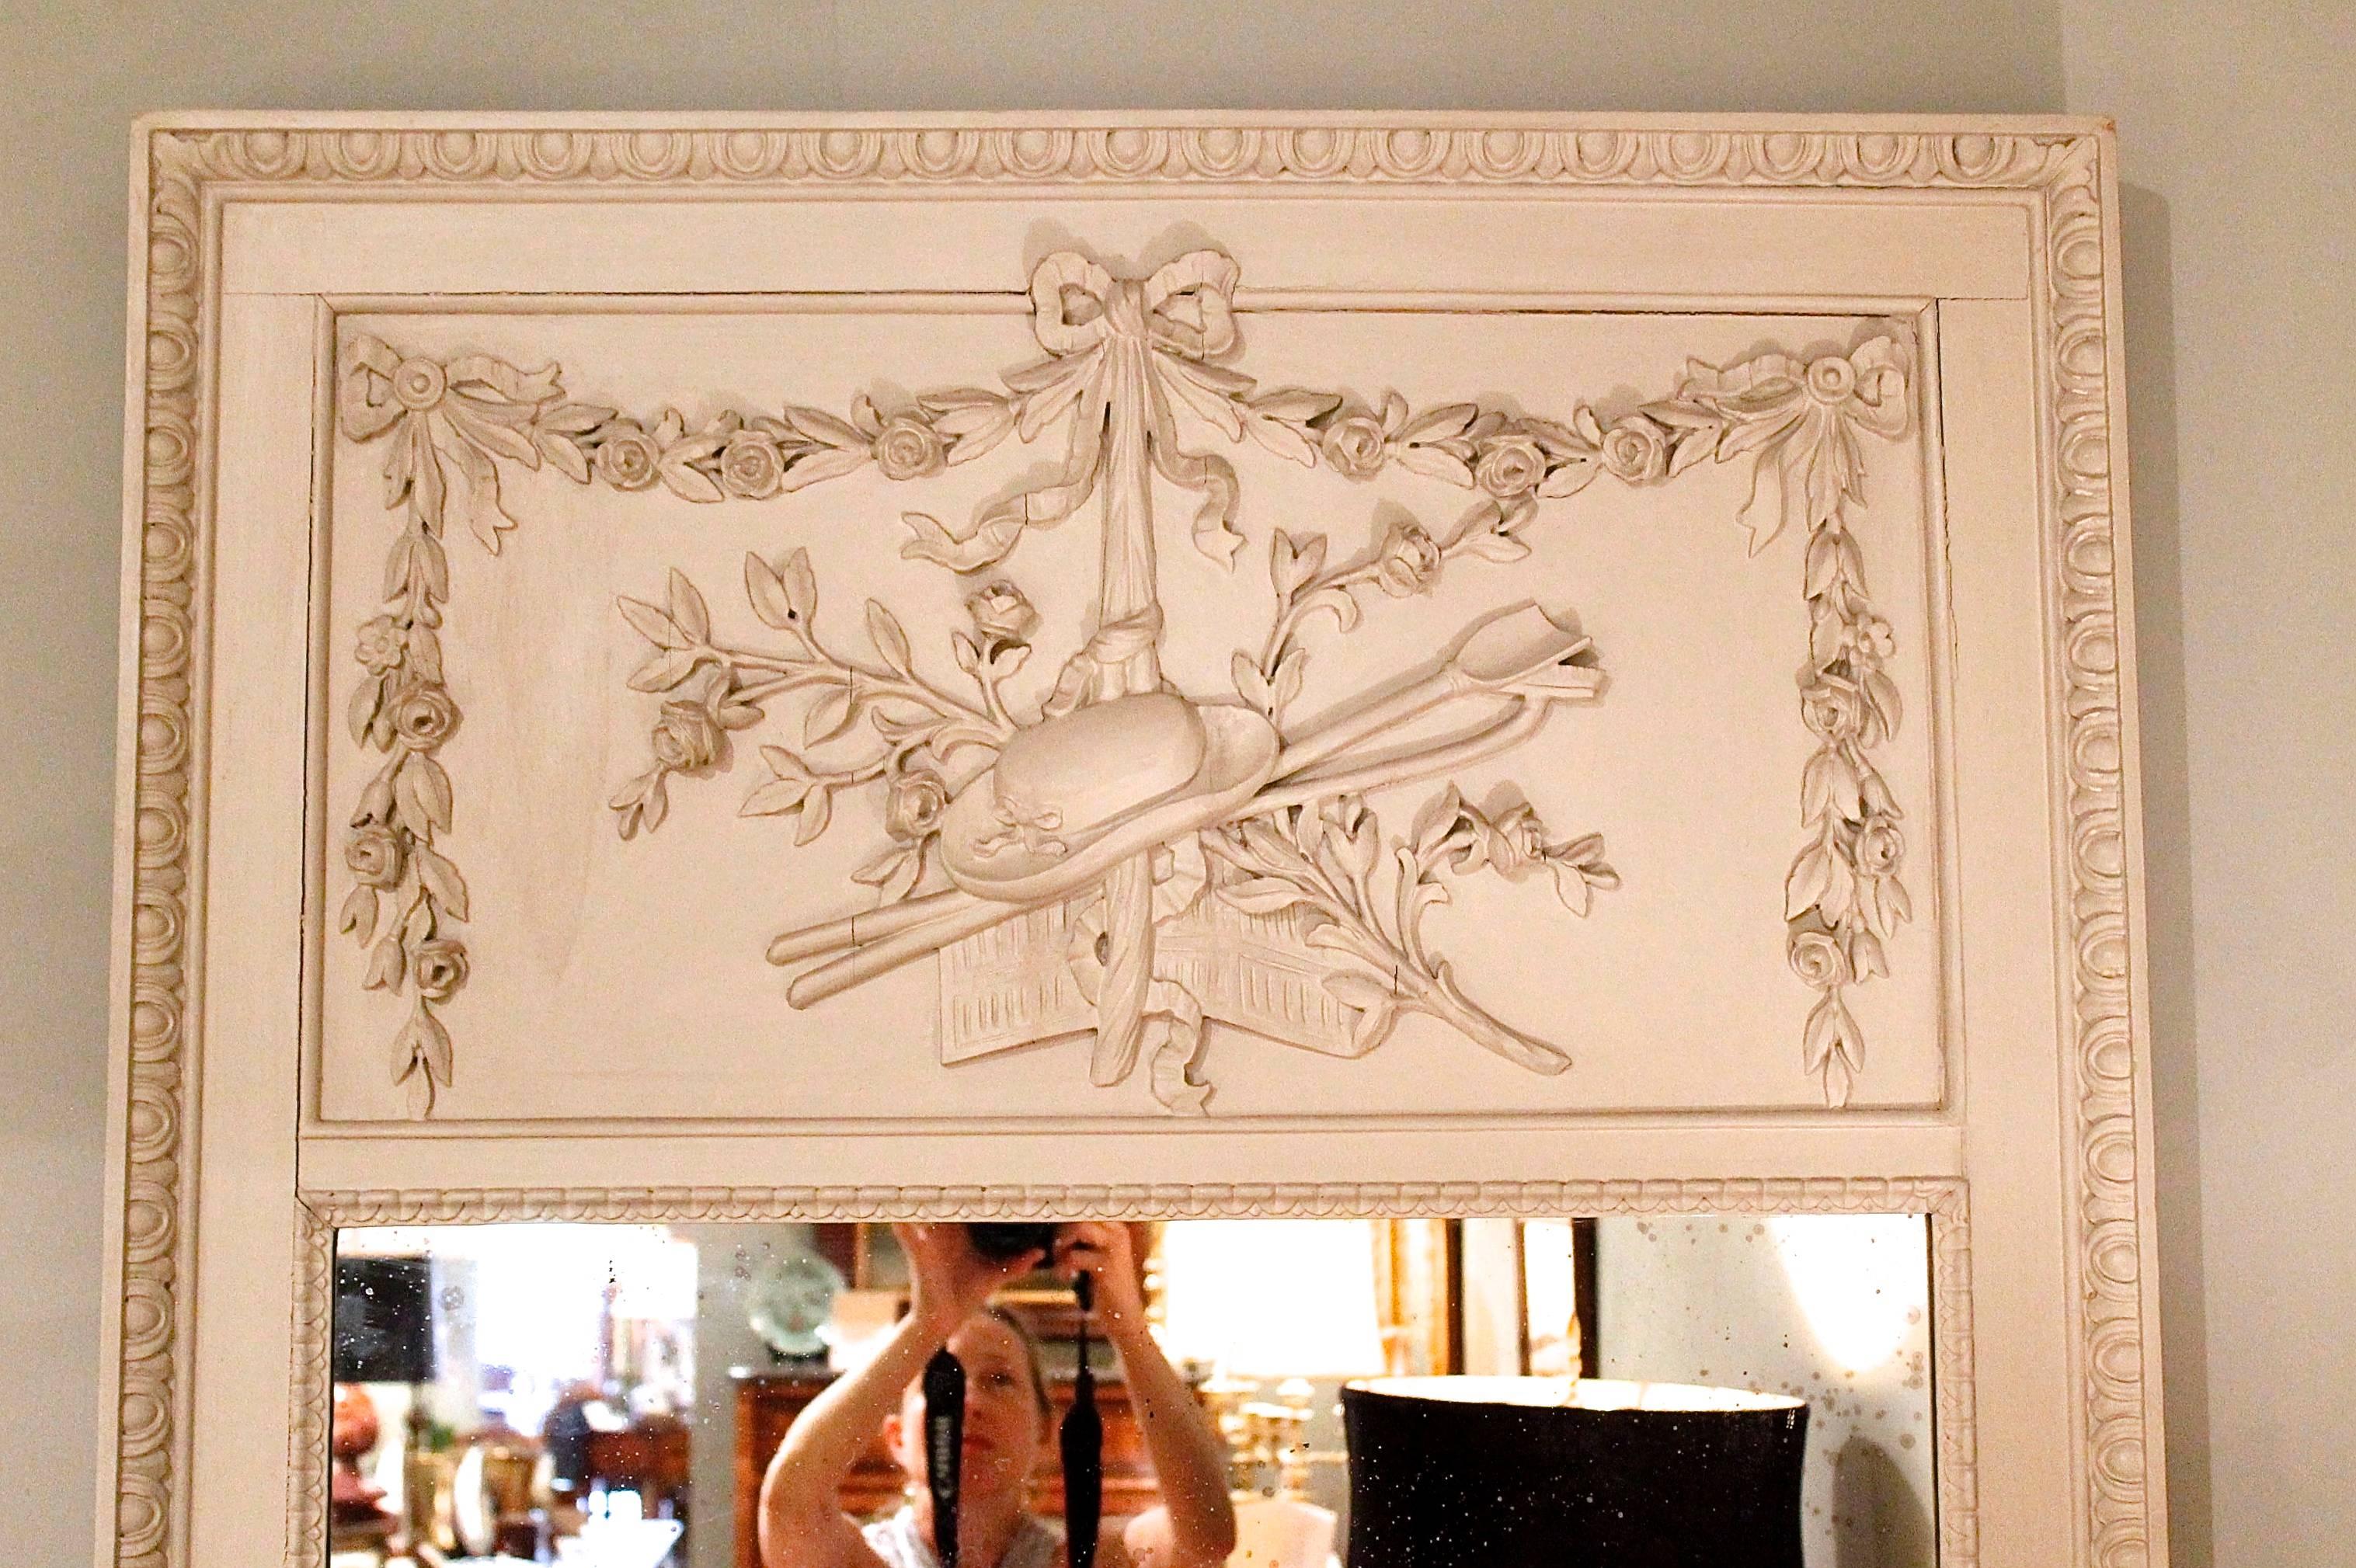 A lovely French trumeau mirror ornamented with applied carving depicting rose garlands, garden tools and a hat, the whole bounded by egg and dart moulding and with low relief waterleaf carving around the mirror.